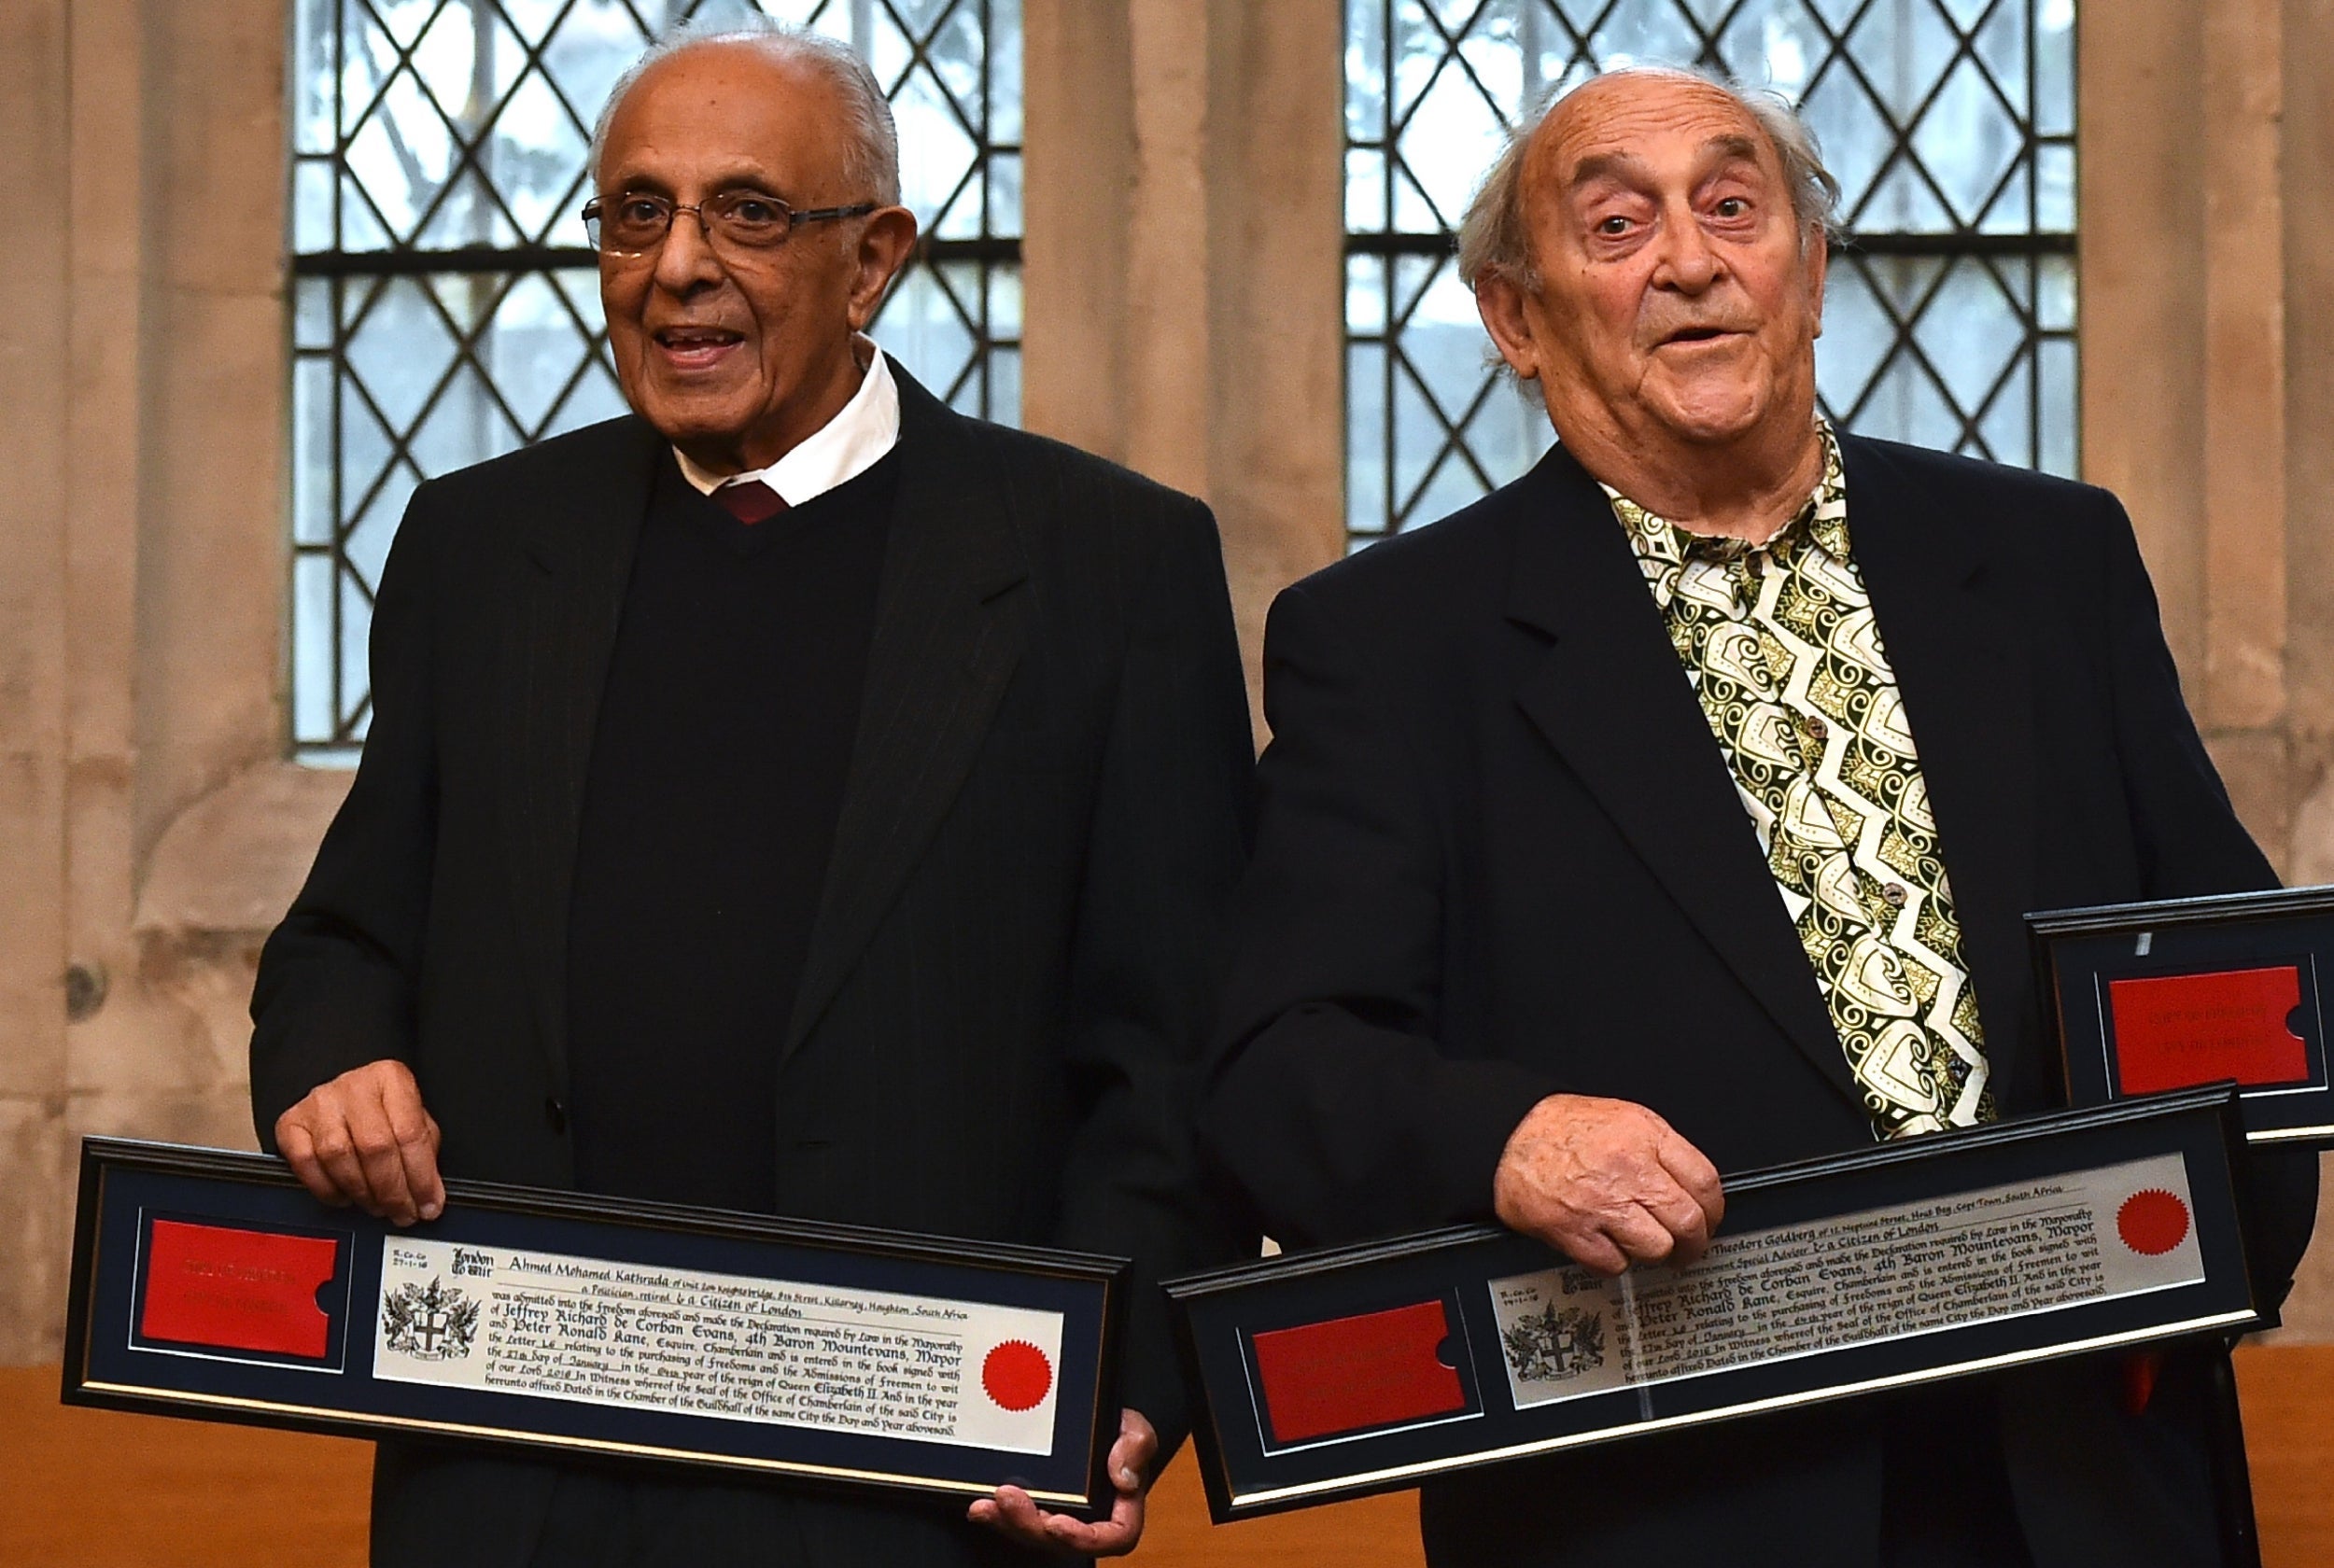 Goldberg alongside South African politician Ahmed Kathrada (left) holding certificates of their award of the Freedom of the City of London at the Guildhall on 27 January 2016